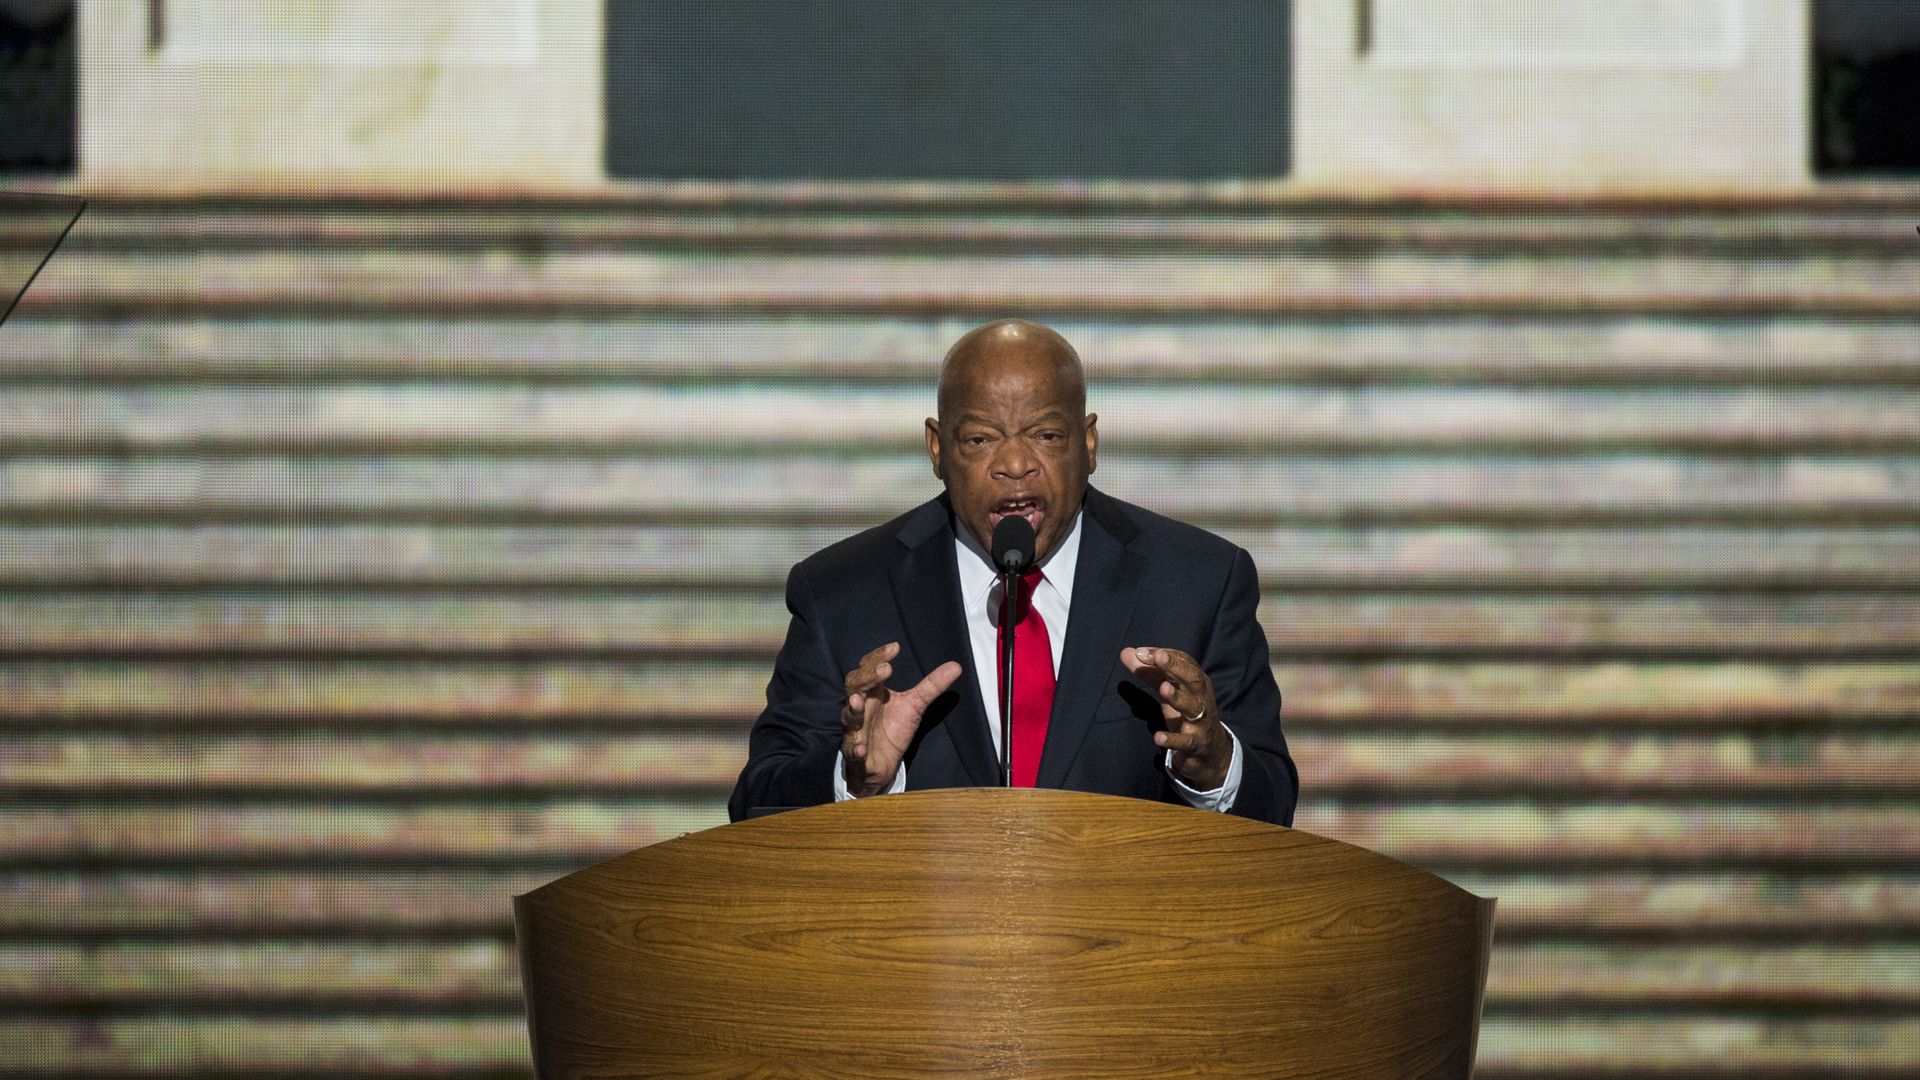 The late Rep. John Lewis is seen speaking during the 2012 Democratic National Convention.